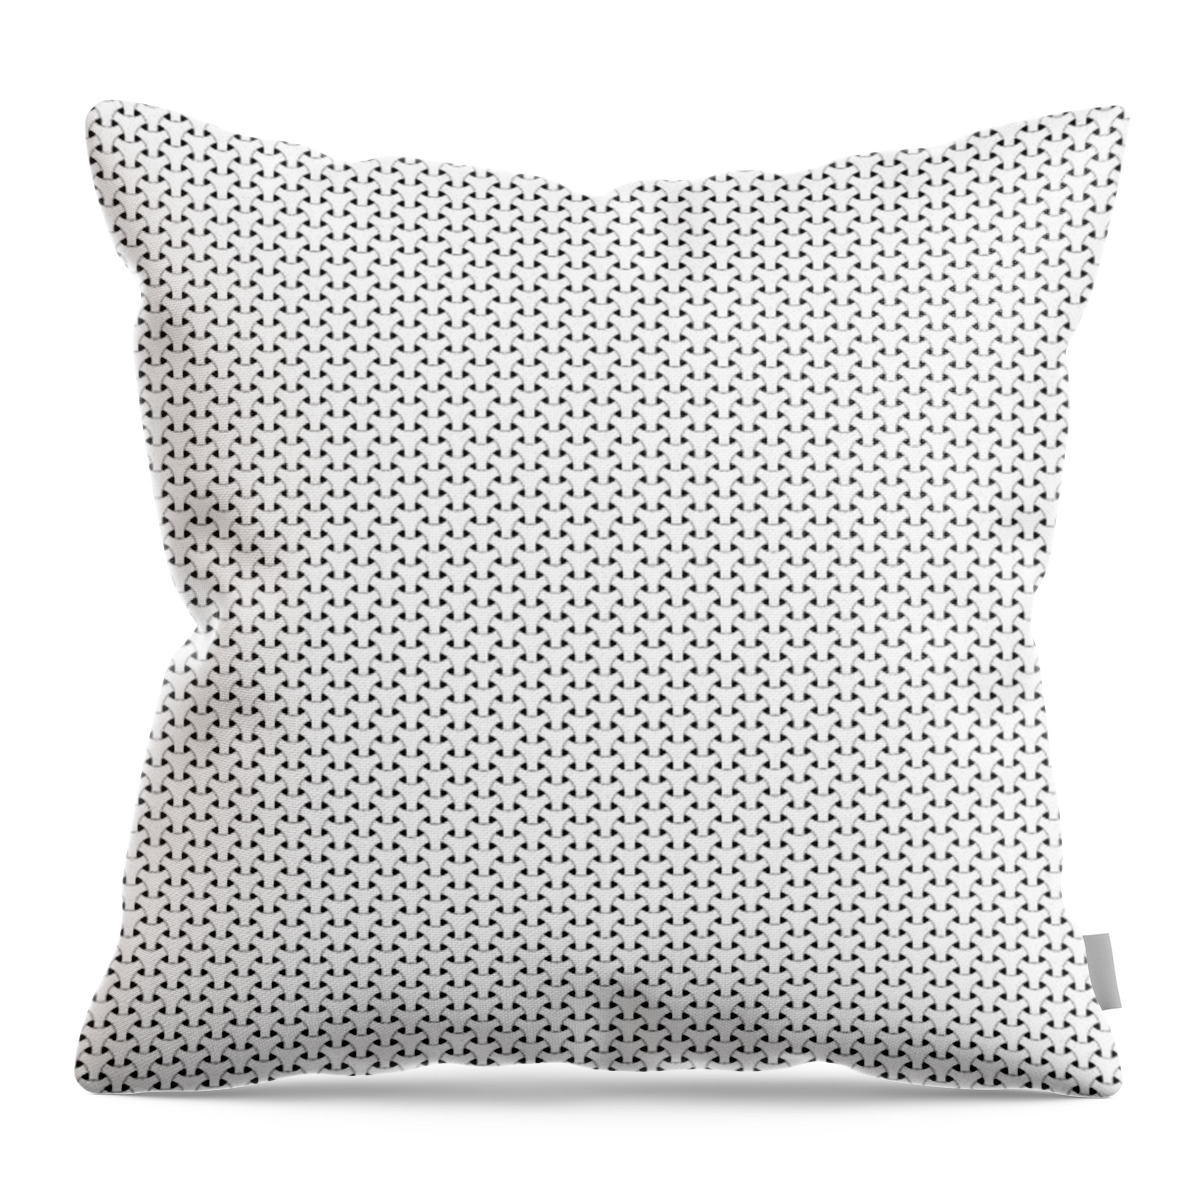 Basket Weaver Throw Pillow featuring the digital art Black and White Basket Weave Circles Shapes Illustration by PIPA Fine Art - Simply Solid